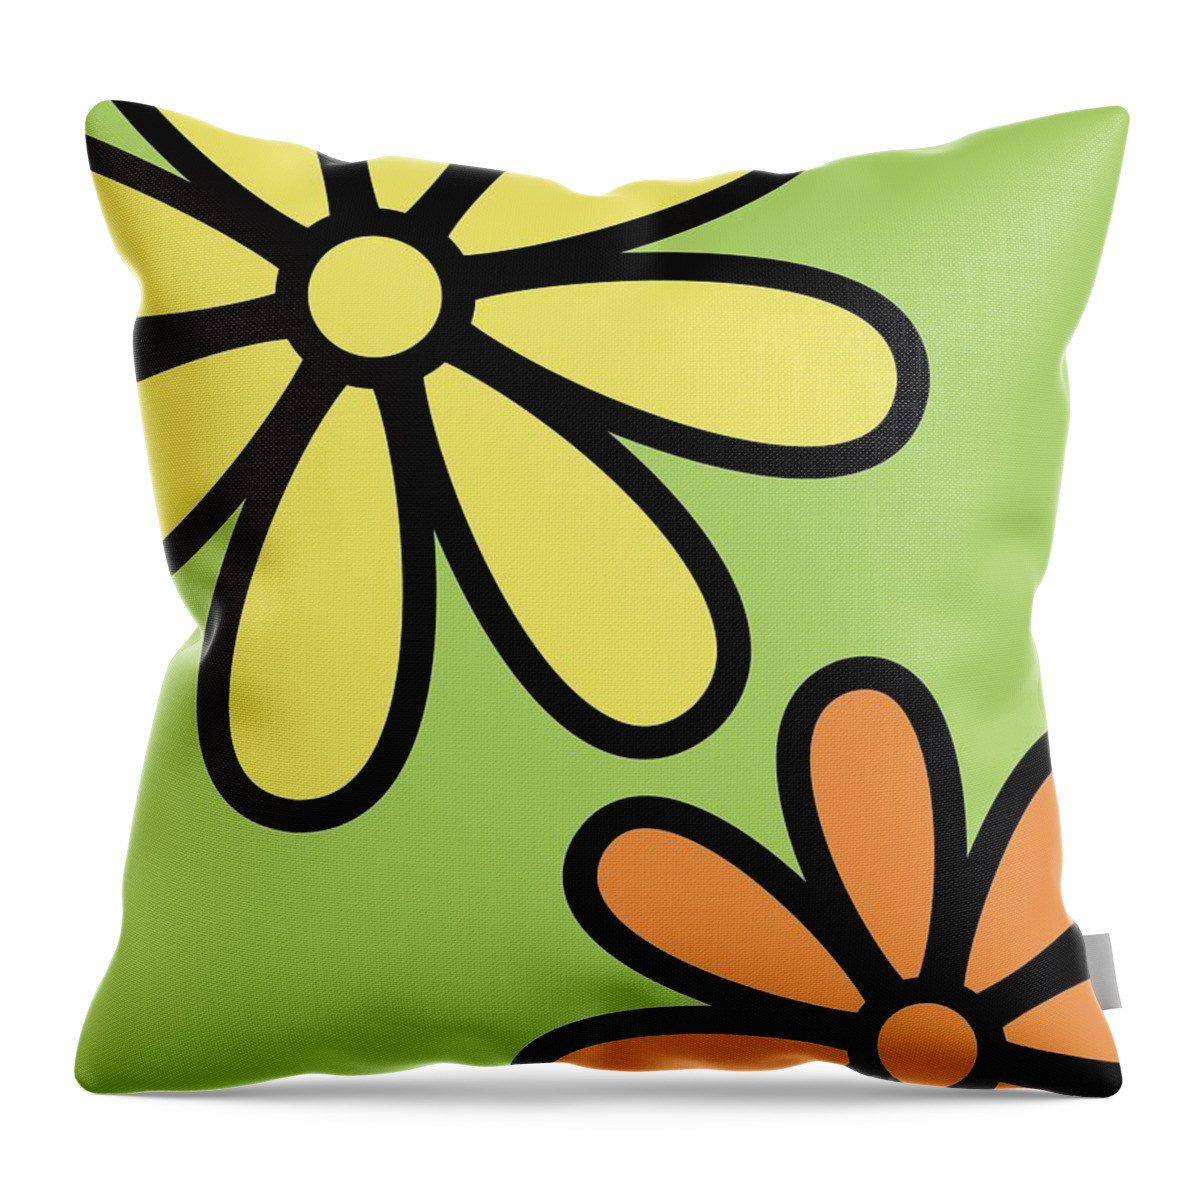 Mod Throw Pillow featuring the digital art Mod Flowers 3 on Green by Donna Mibus